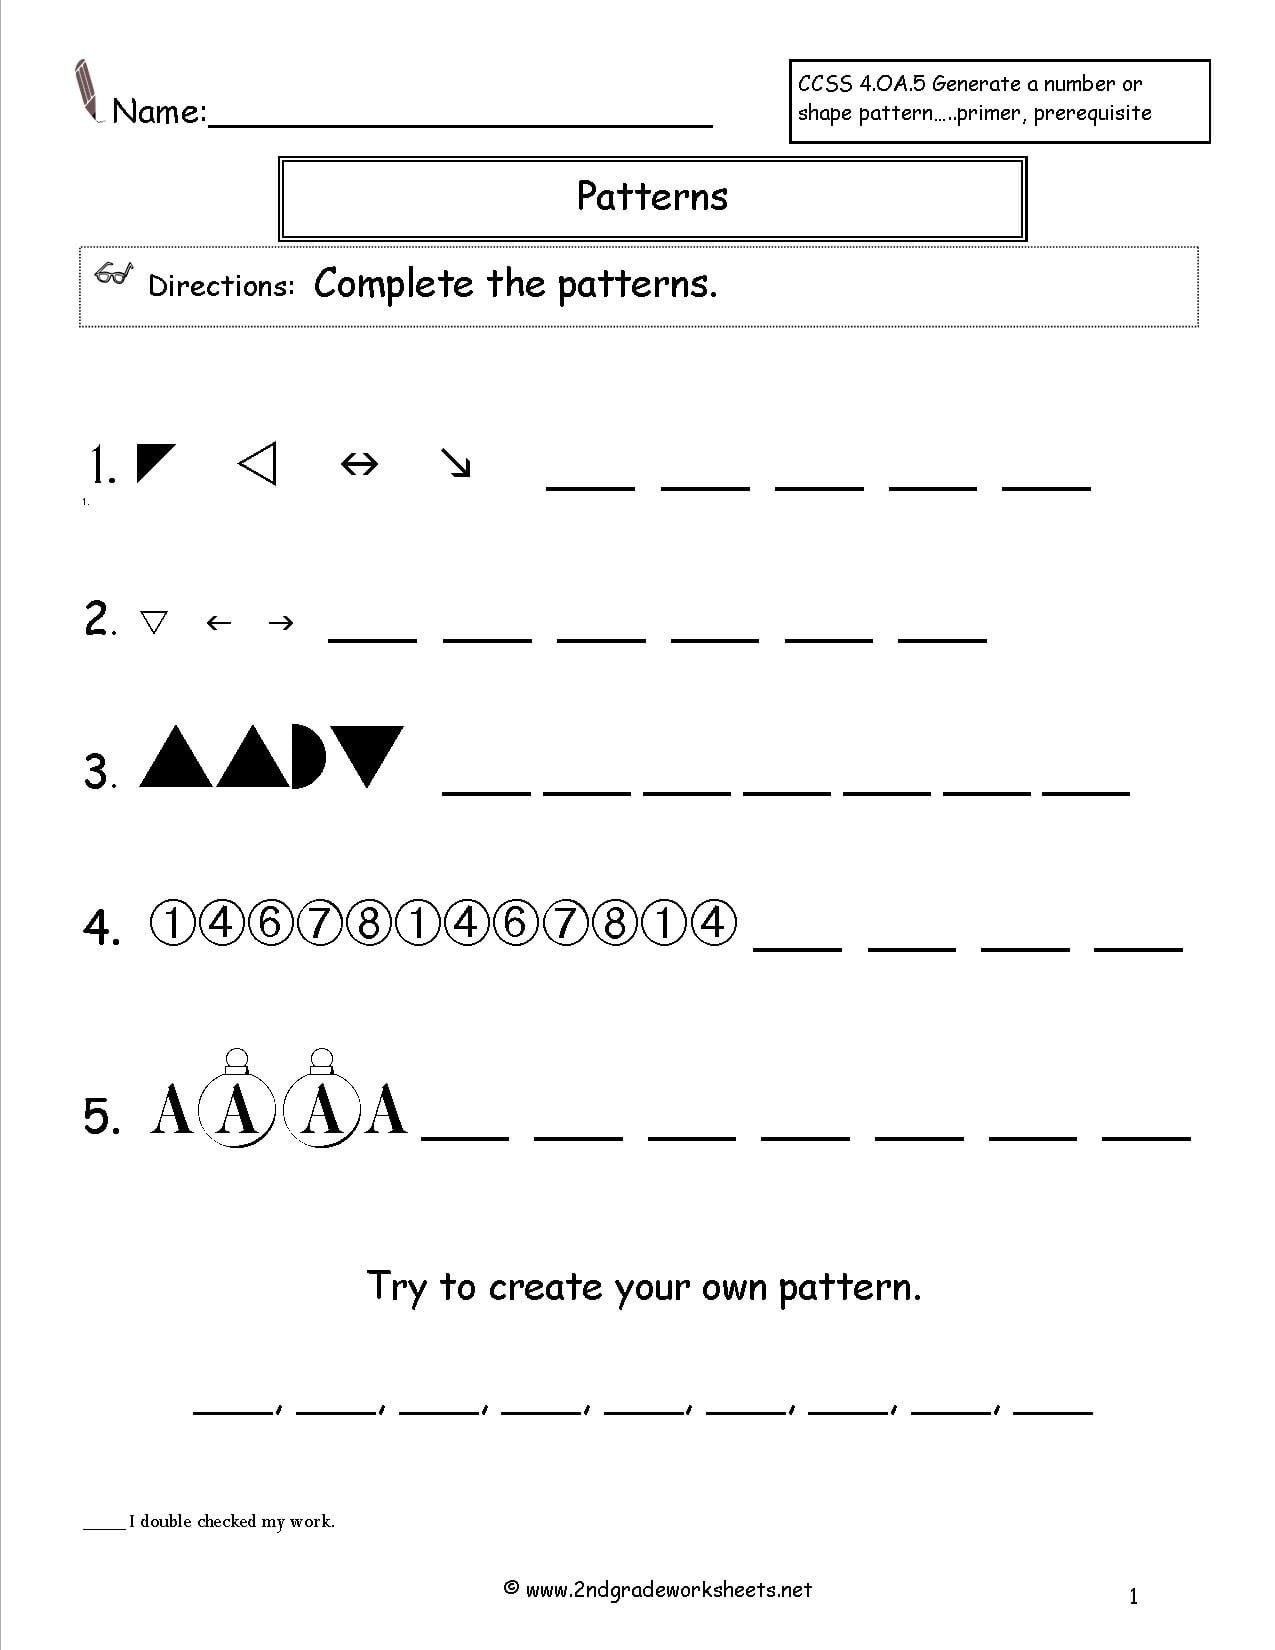 Number And Shape Patterns Worksheets Also Finding Patterns In Numbers Worksheets